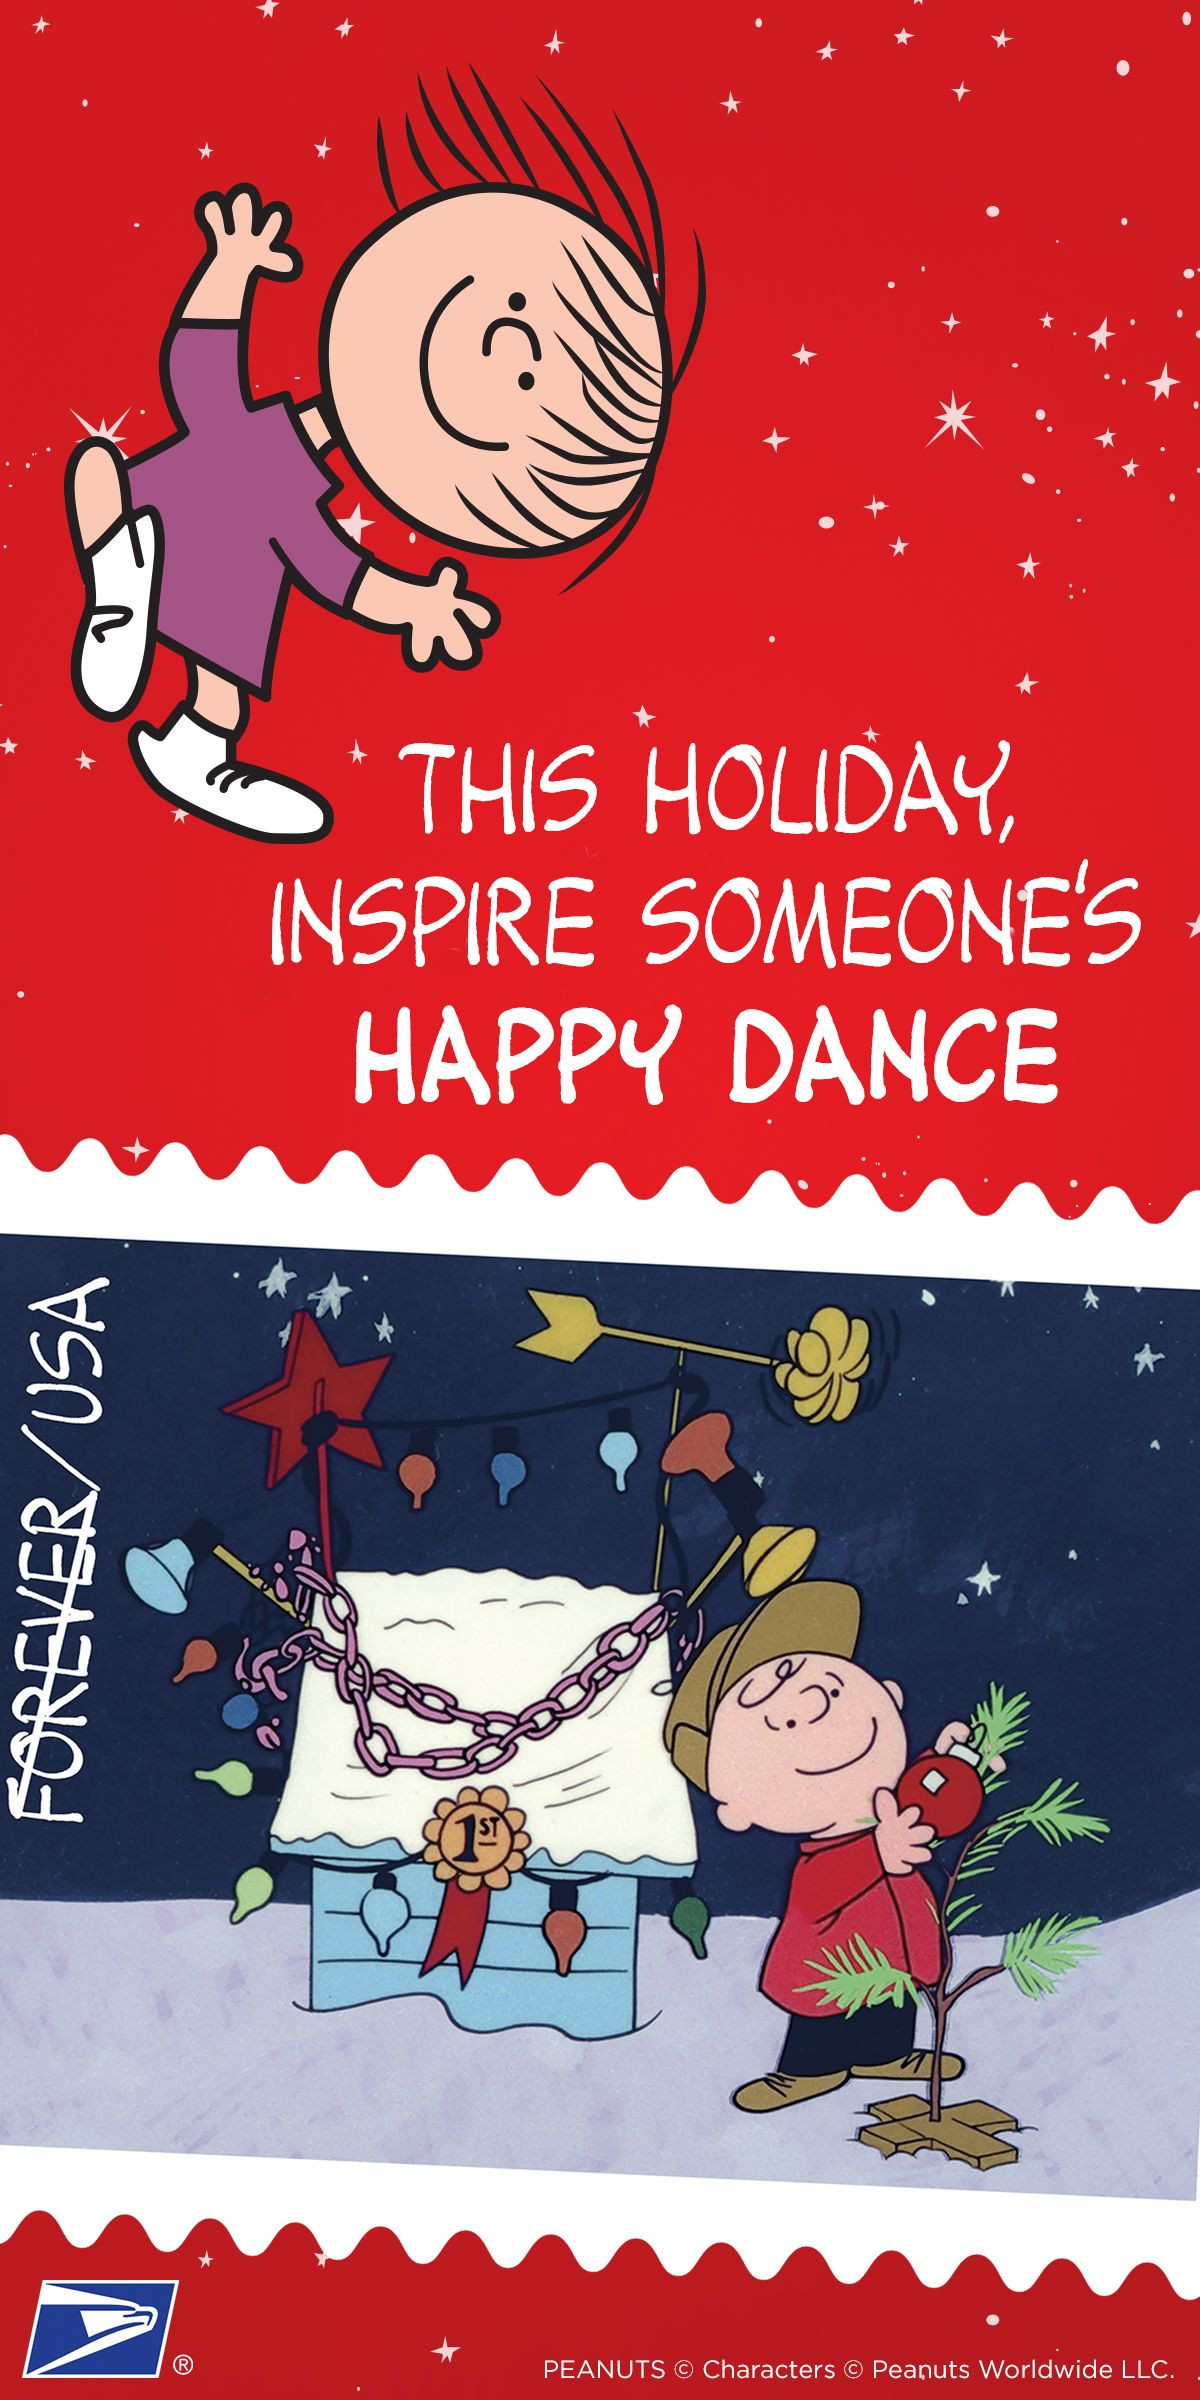 Peanuts Christmas Quotes
 Luxury Charlie Brown Christmas and Quotes